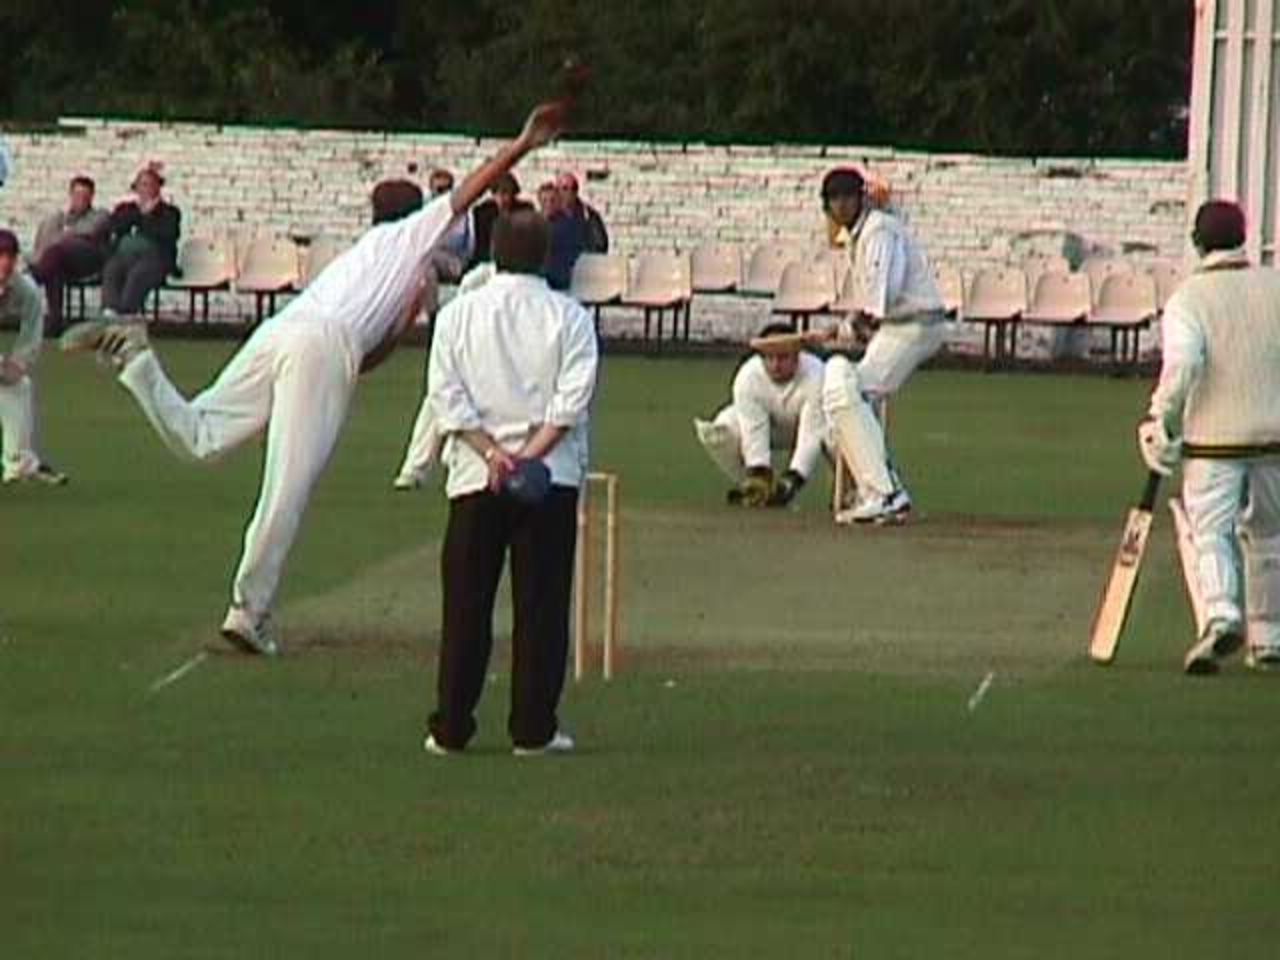 East Lancs South African professional Claude Henderson took five Accrington wickets but could not remove Tariq Hussain